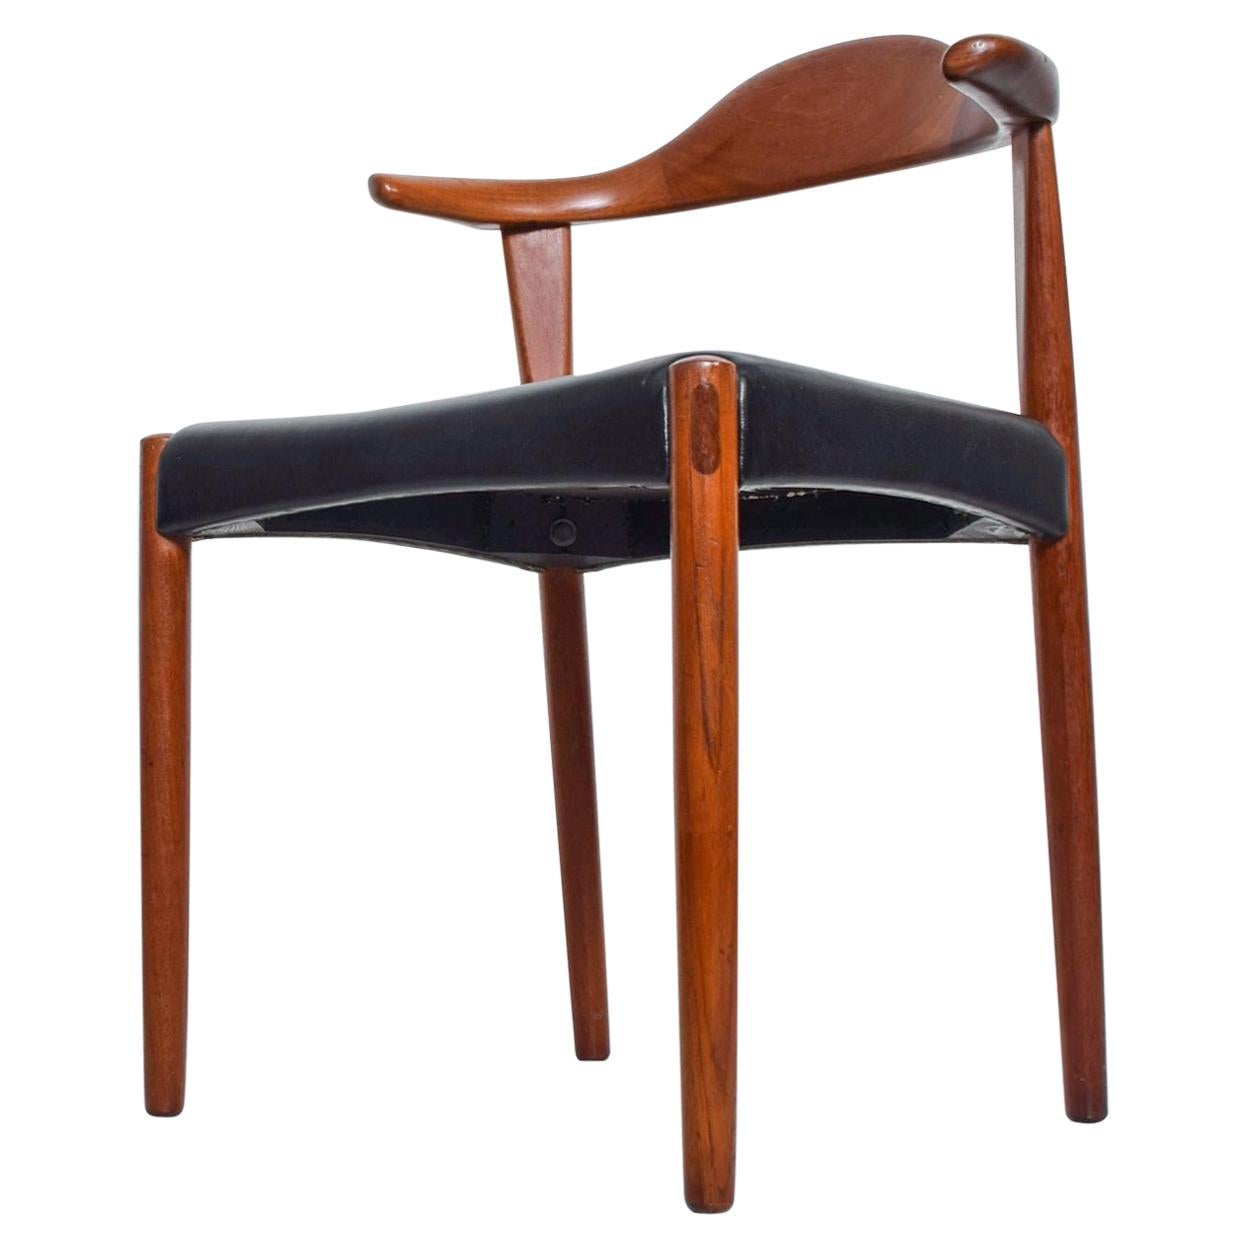 Cow Horn Chairs
Danish Modern Teak Cow Horn Chairs, a Pair, in the style of Hans J Wegner. 1960s
Dimensions 29.63 H x 18.75 x 21 .5 W, Seat 18 H Armrest 26.5 H inches
Original unrestored vintage preowned condition. 
Please review the